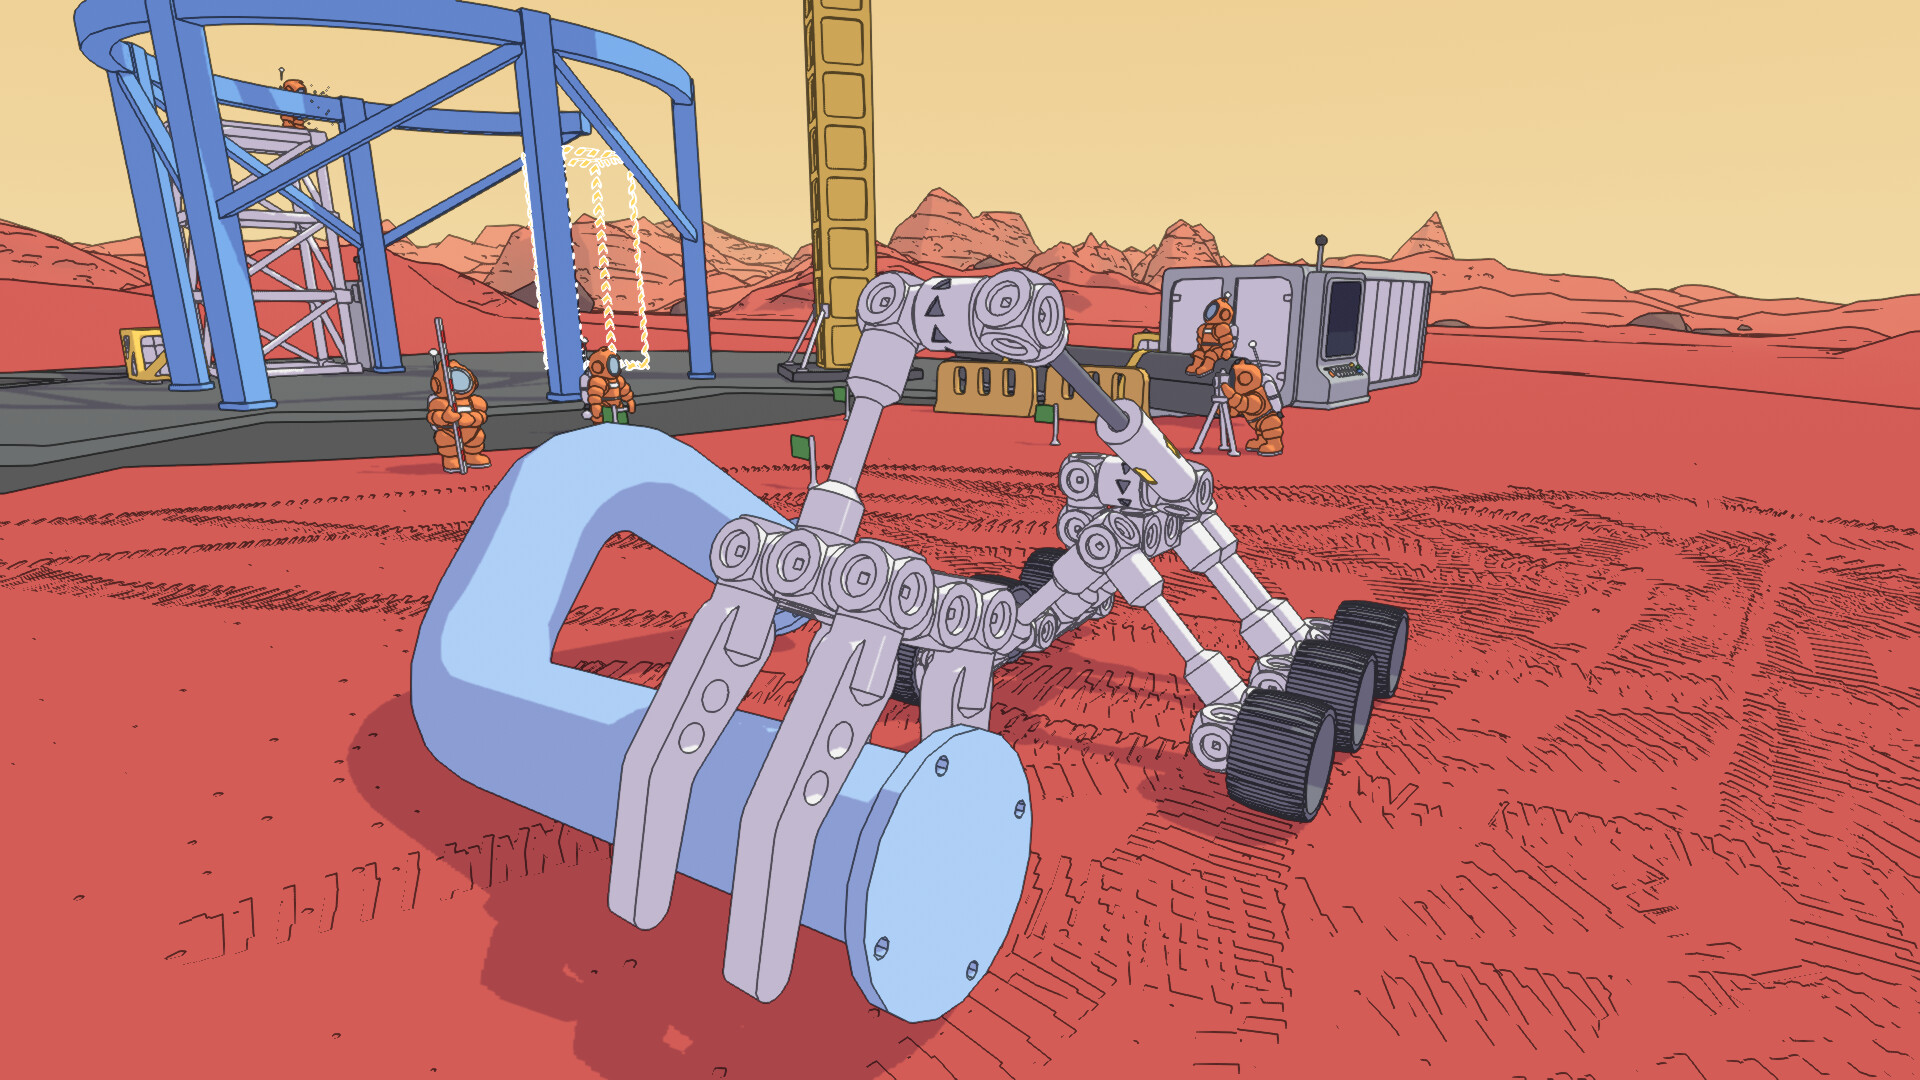  Here's gameplay from that goofy physics-based Mars delivery robot simulator 